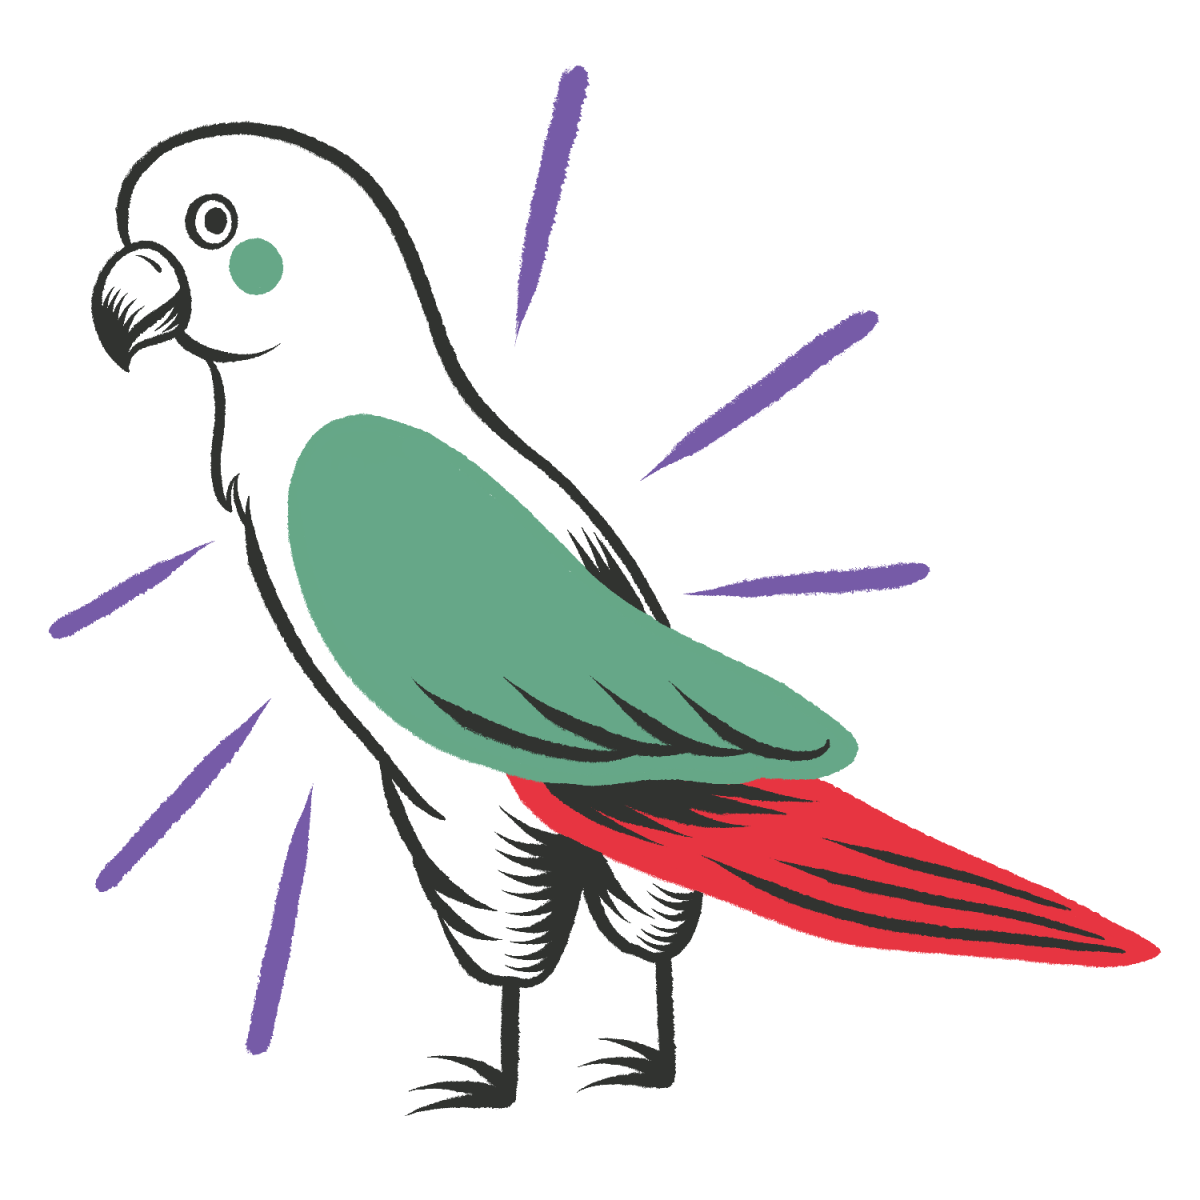 Green Cheek Beer Company is named for the wild parrots that have taken up residence in Orange County.